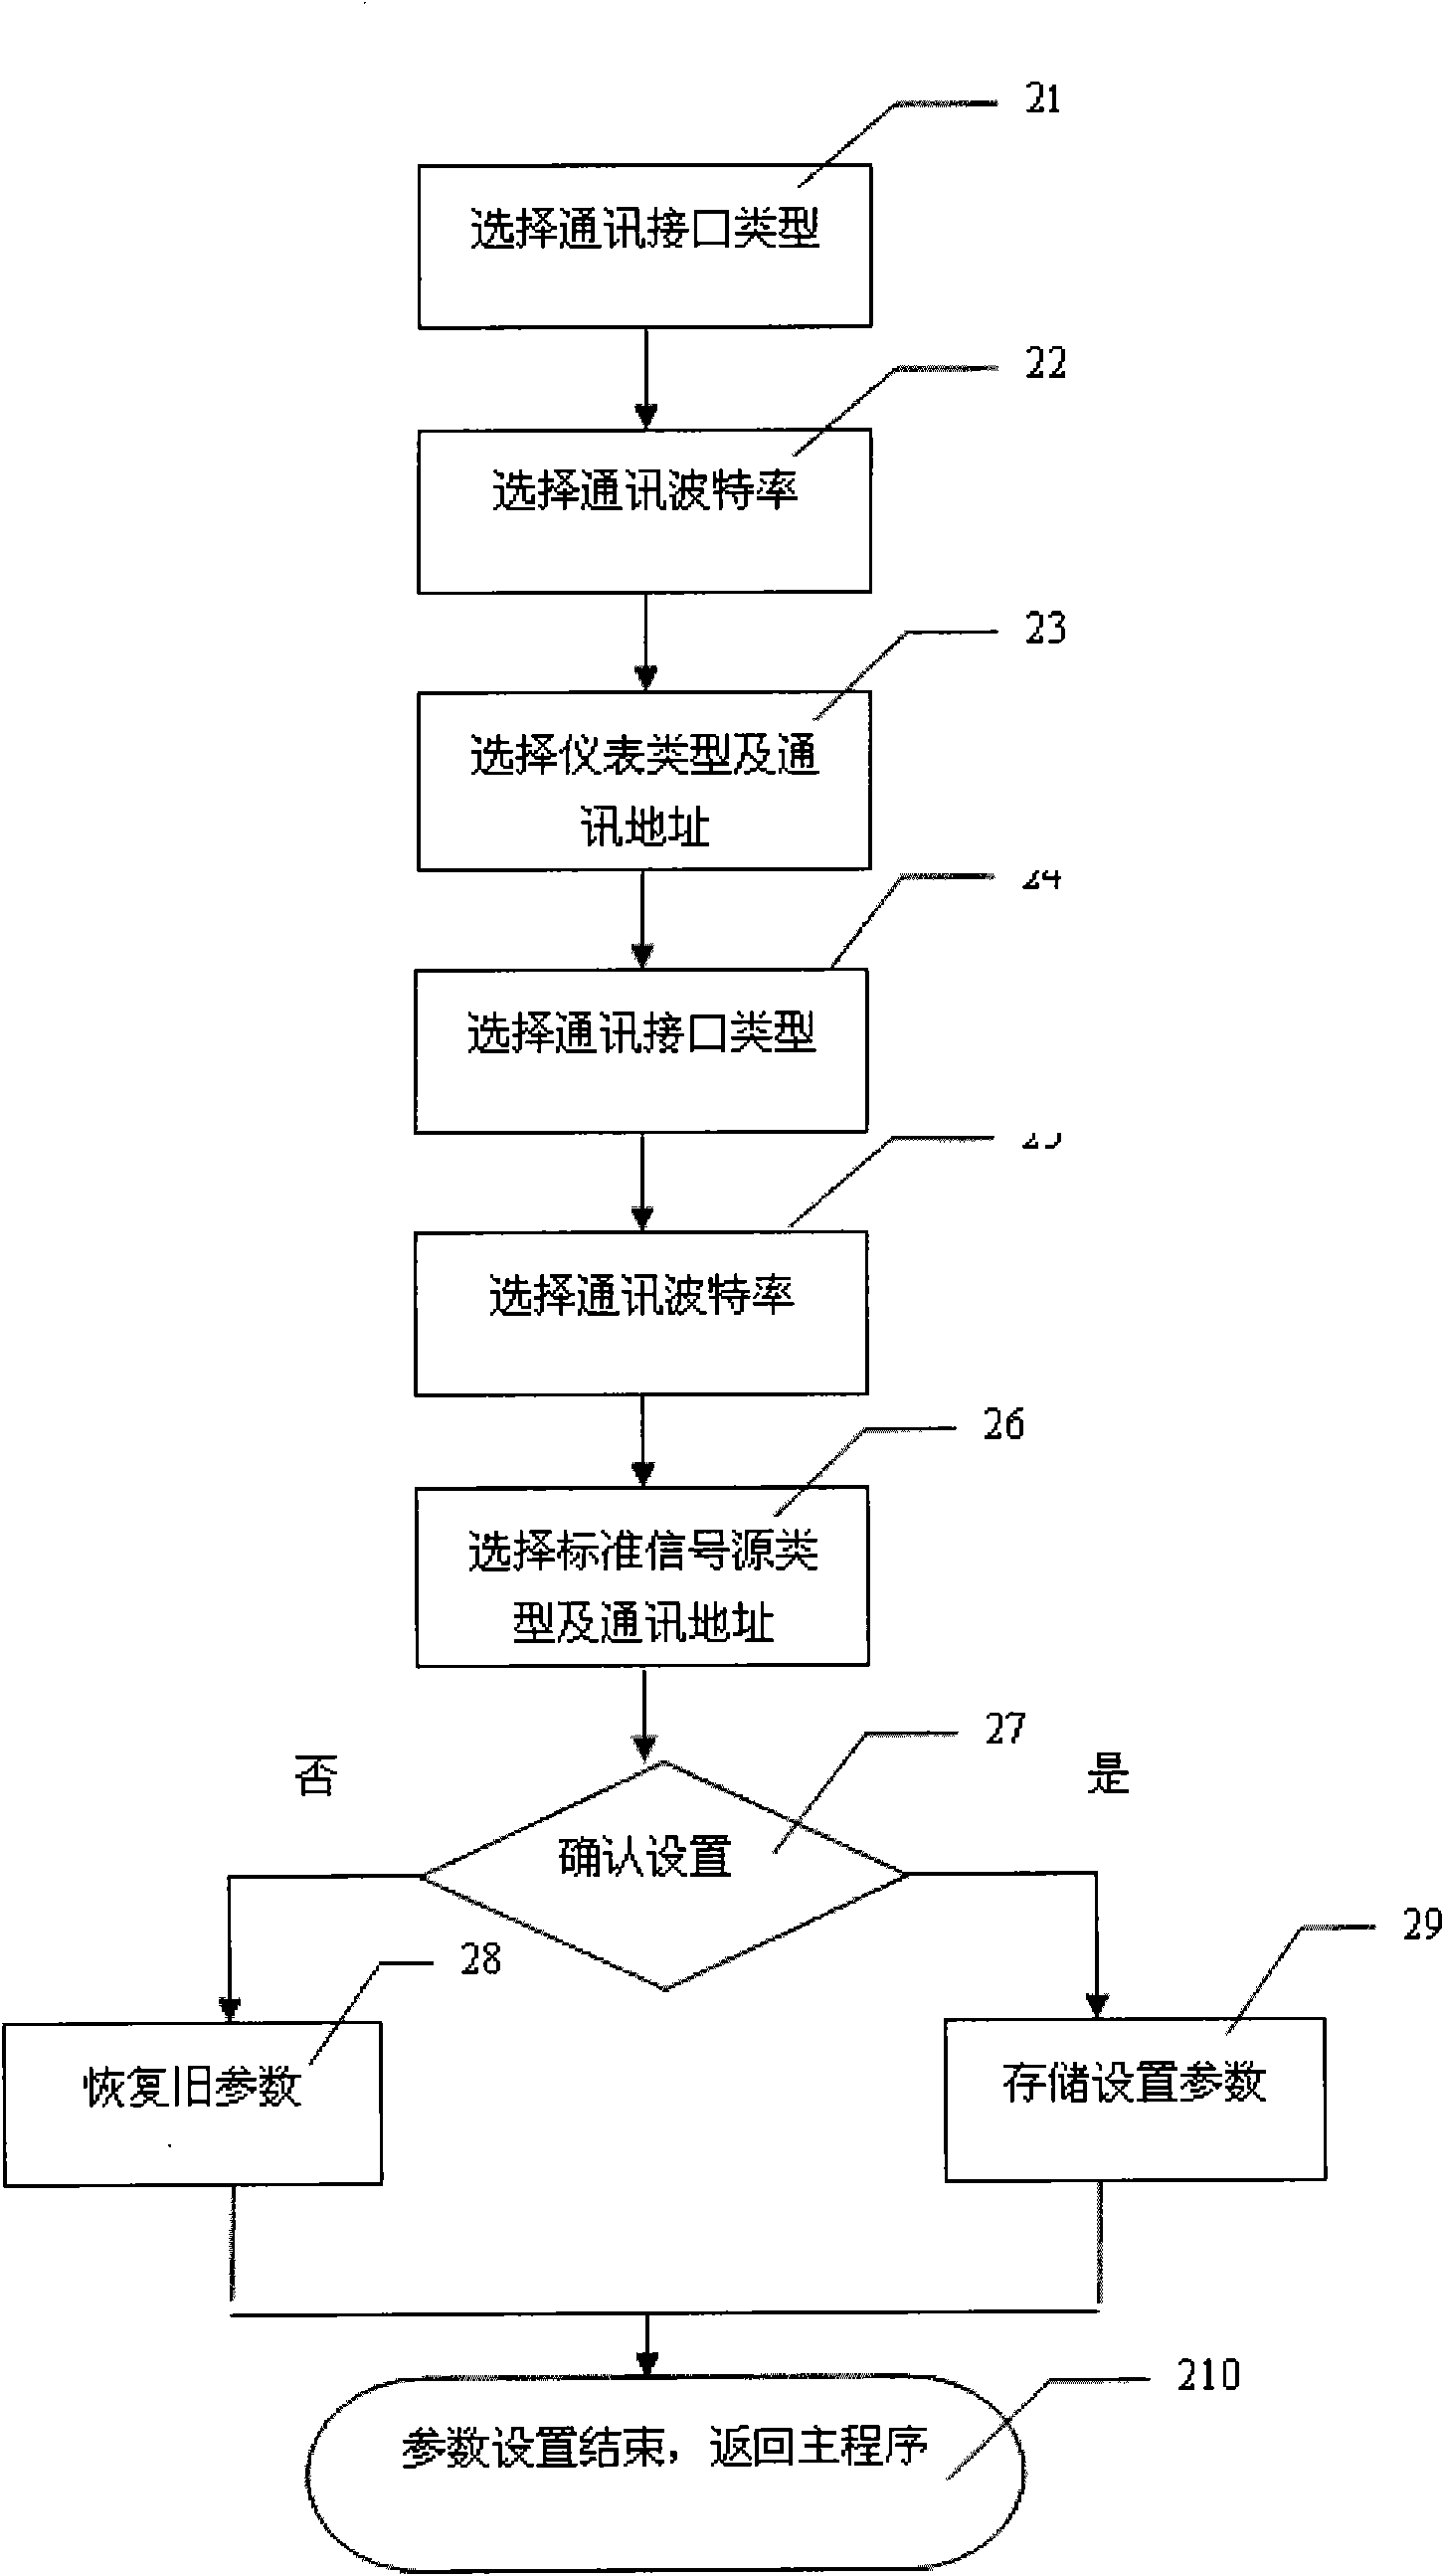 Automatic detection method of multifunctional electric meter